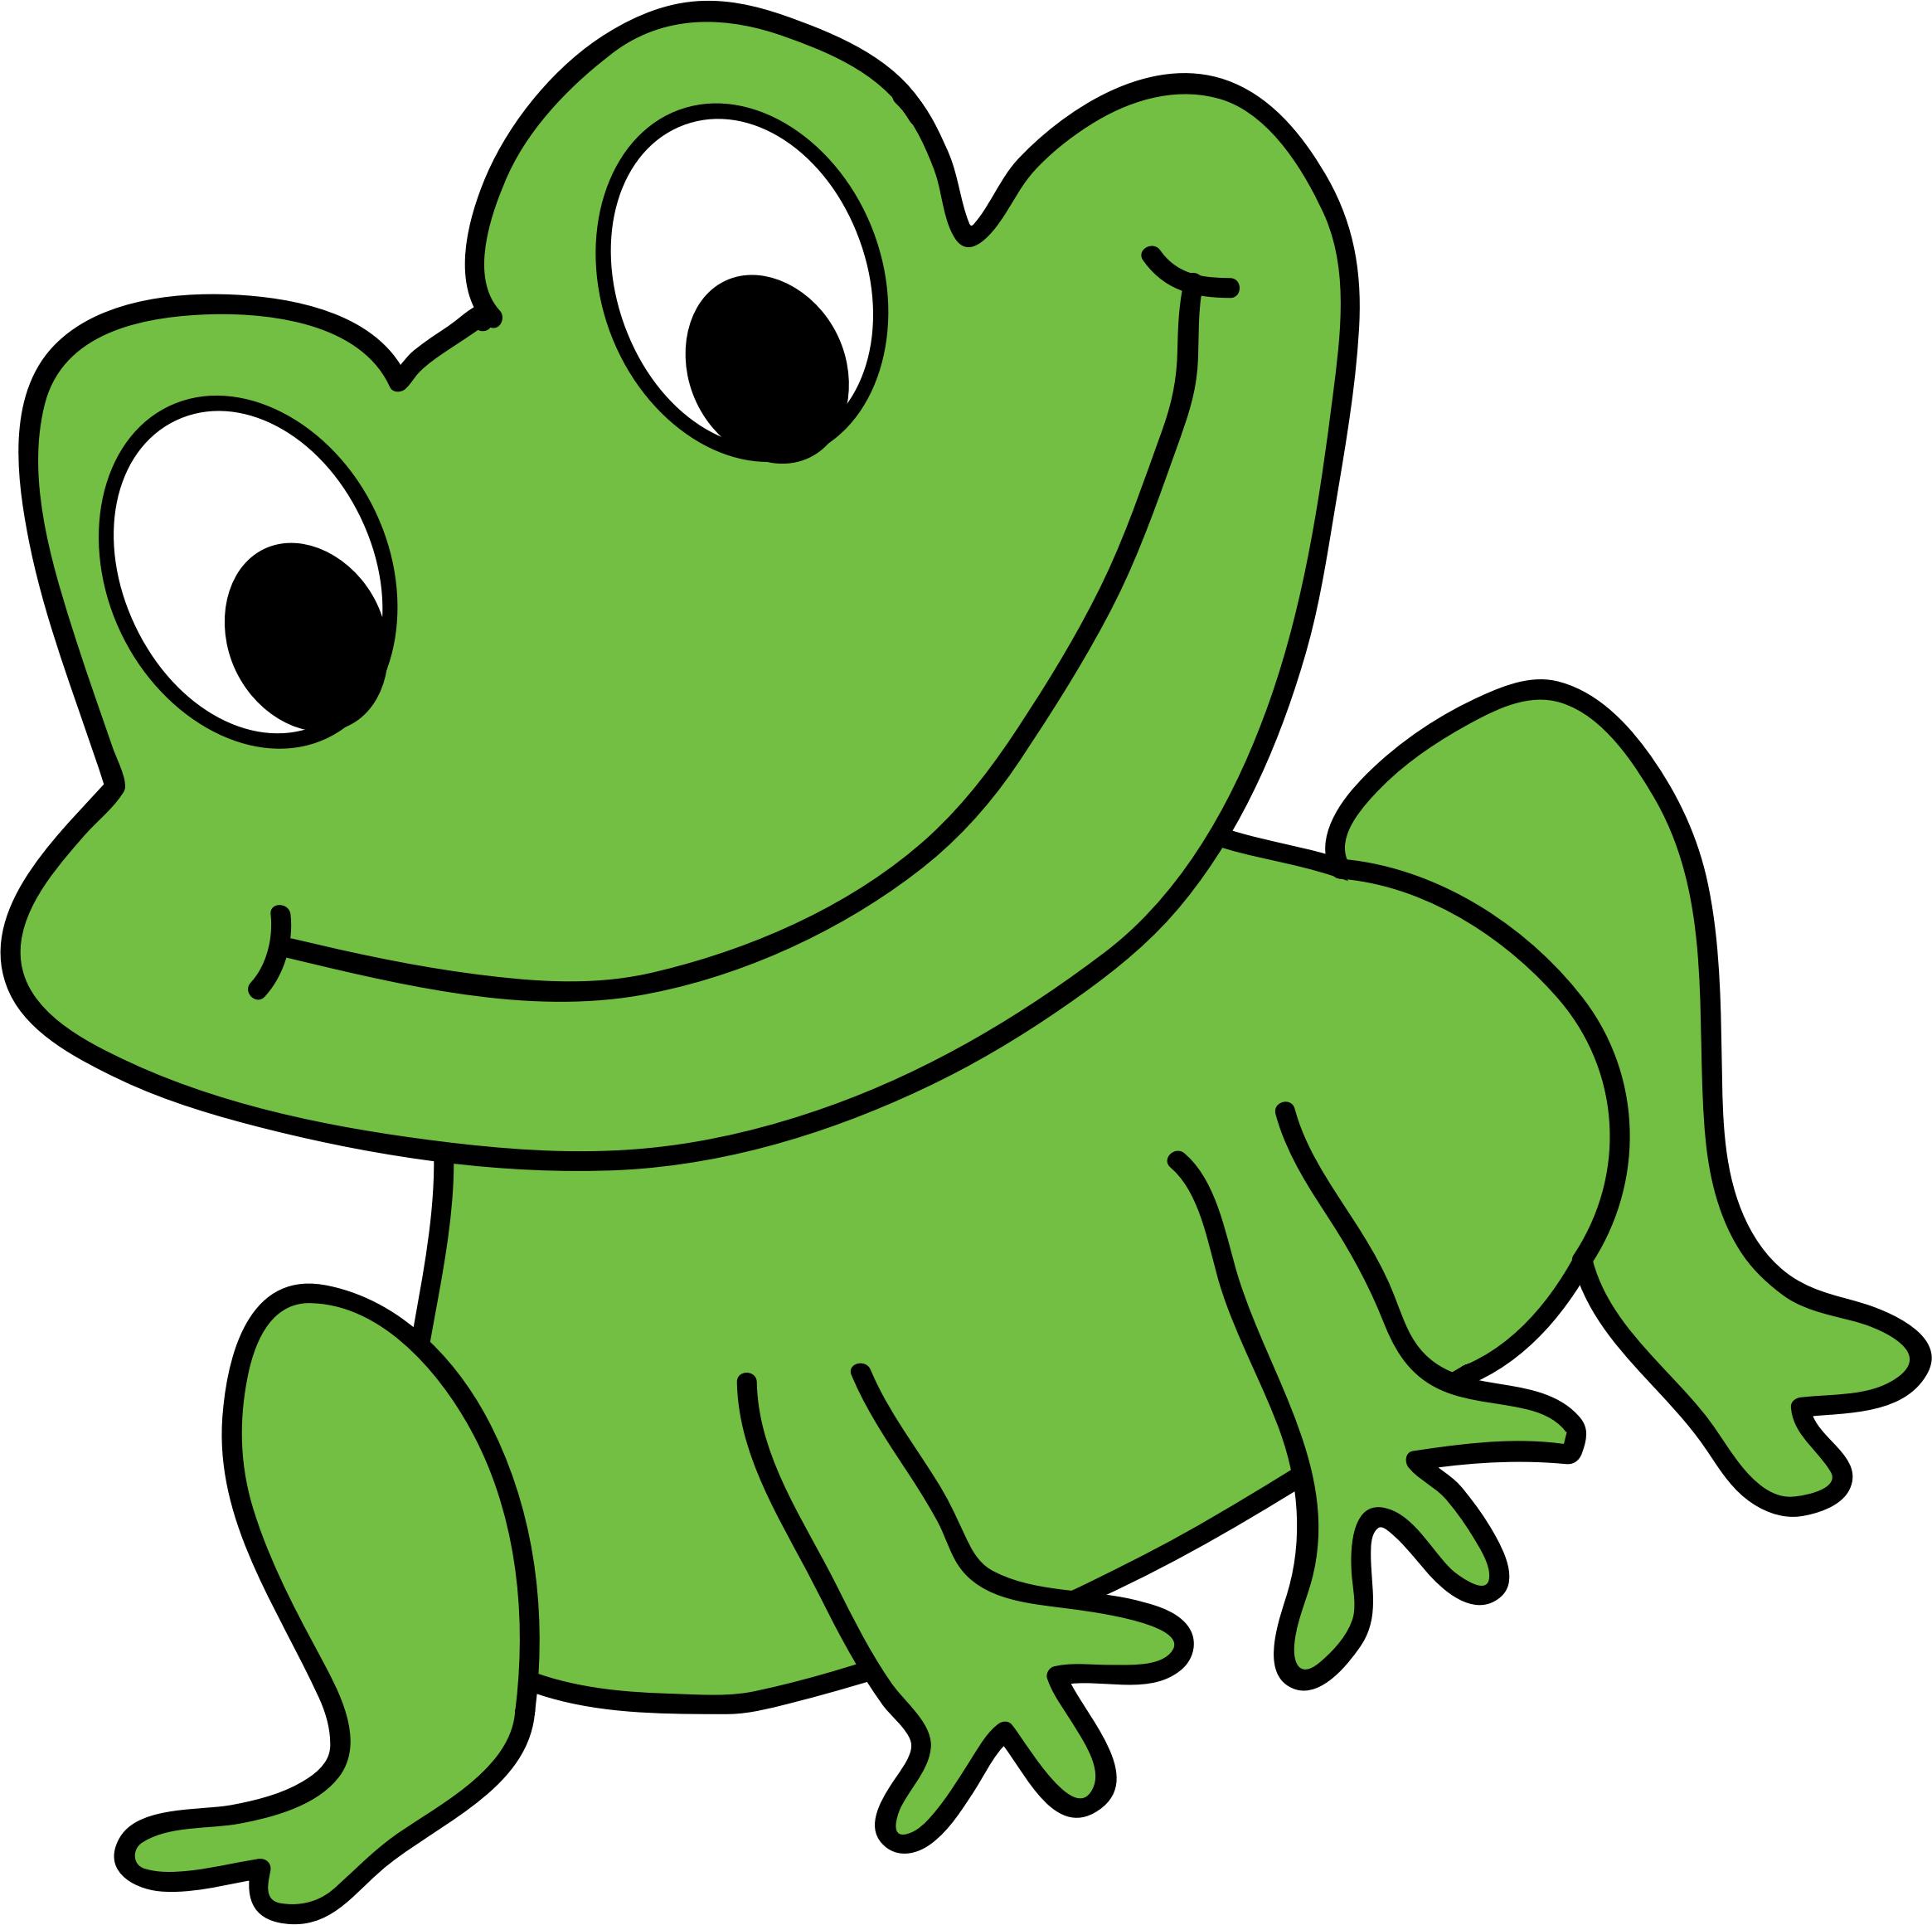 Frog 1 png